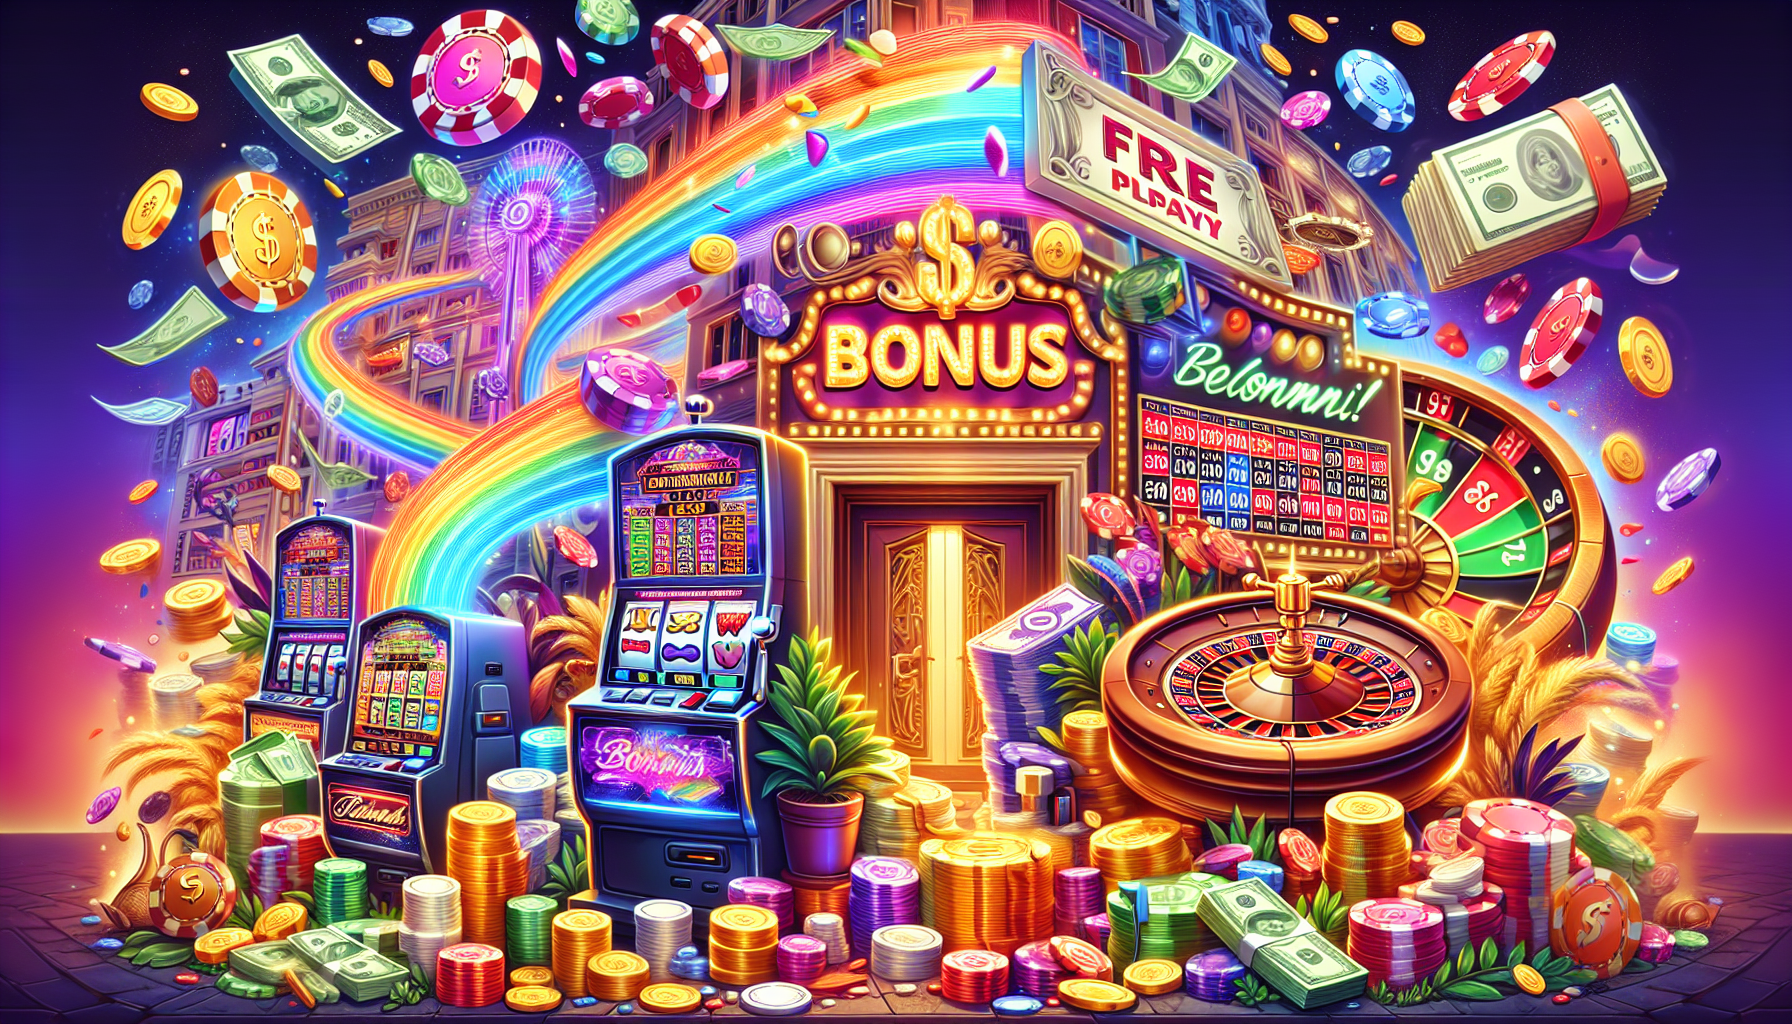 Colorful illustration of various types of casino bonuses